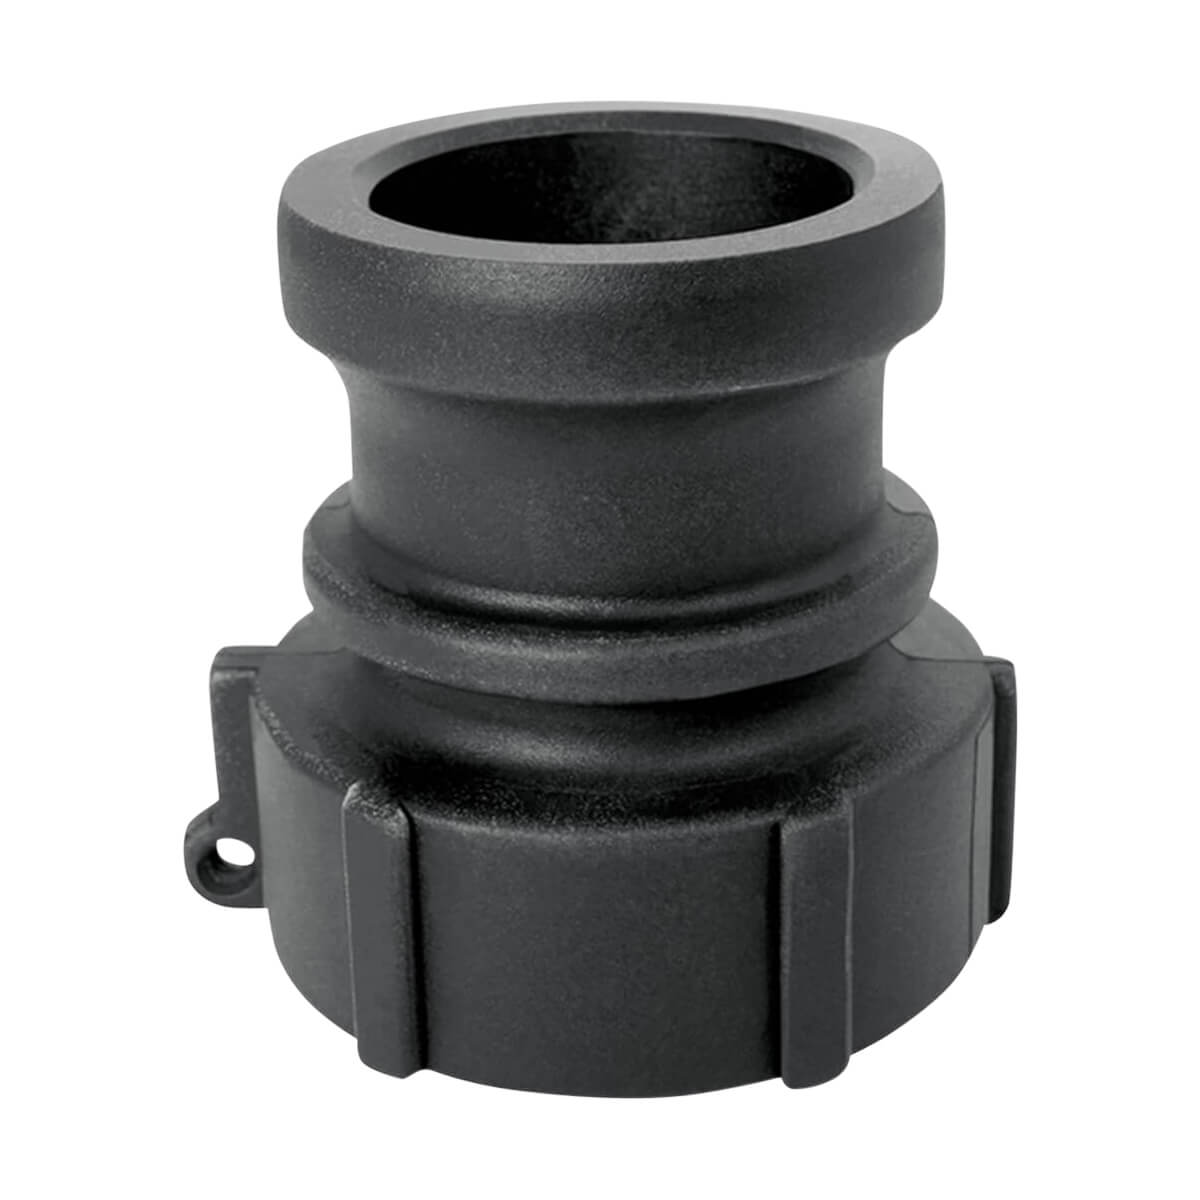 Cam Couplers A Series Male Adapter x Female NPT - M x FPT 1-1/2-in